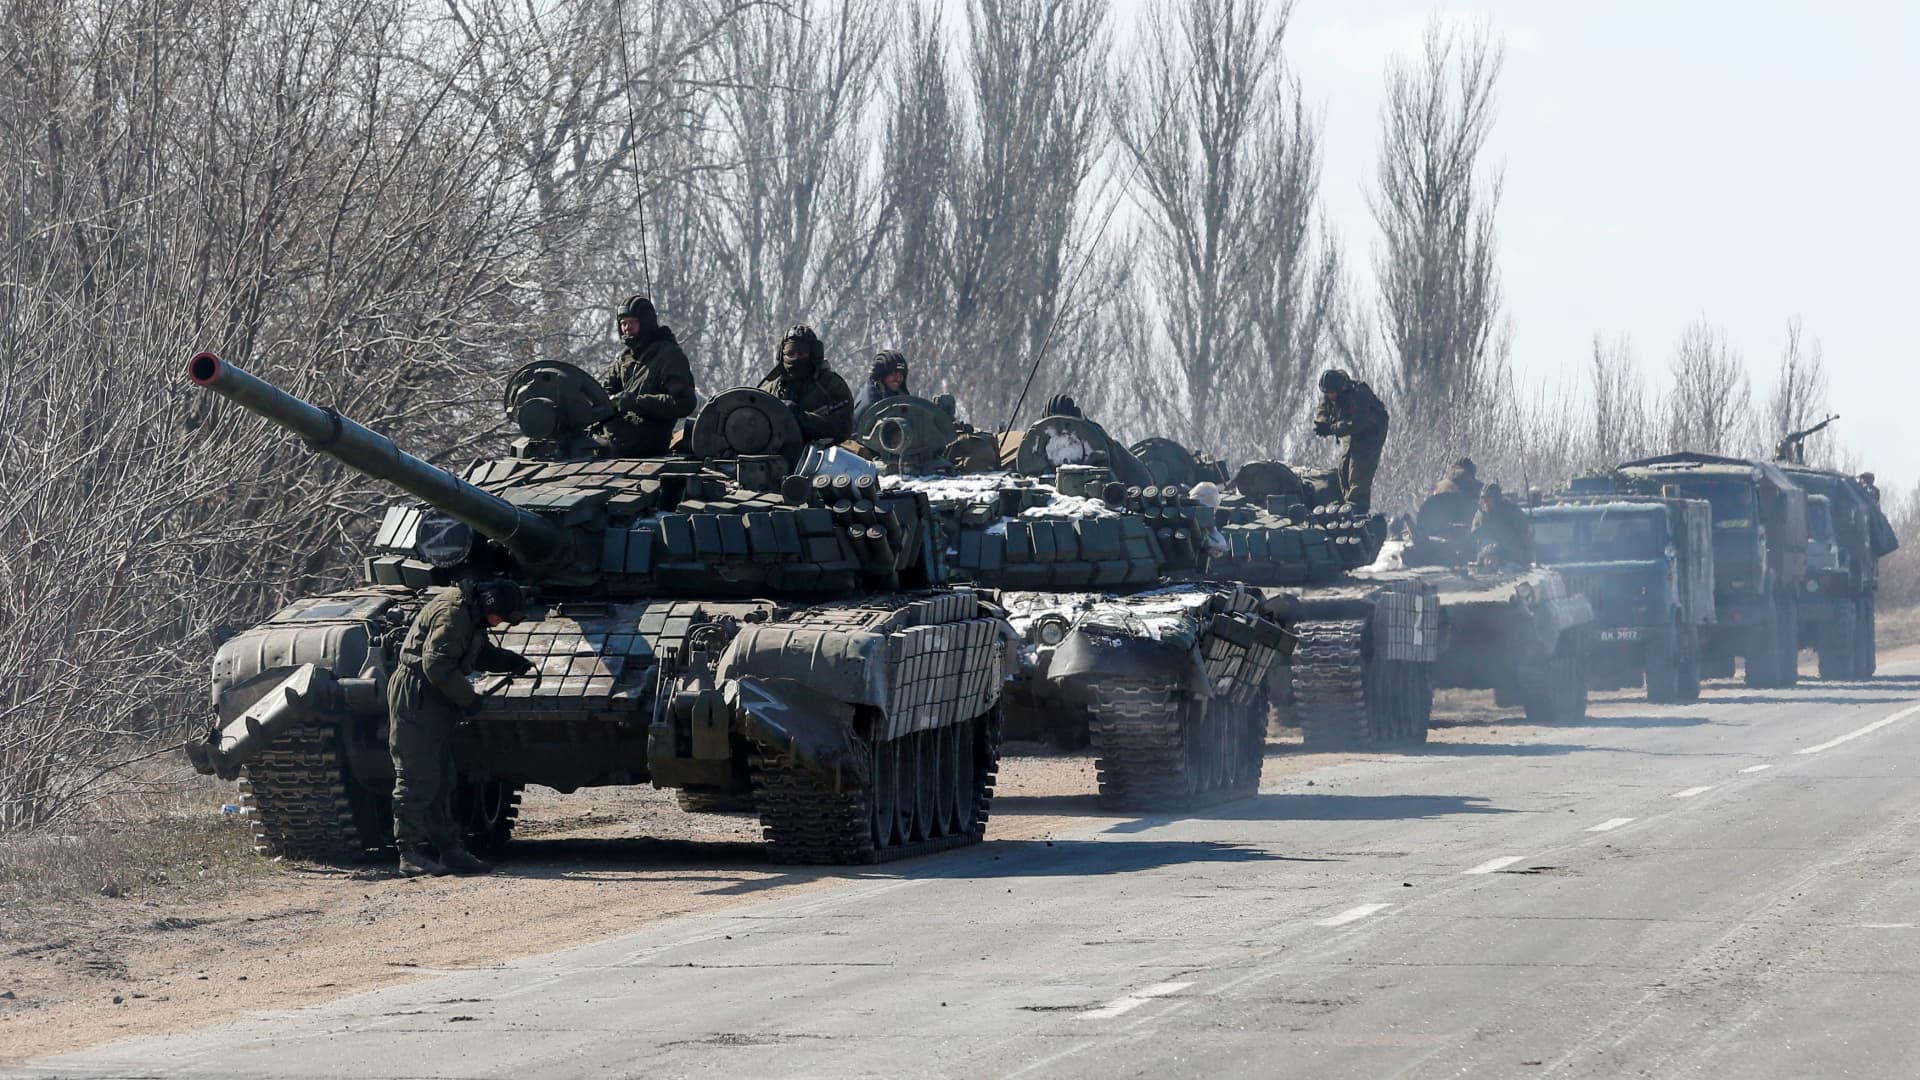 A view shows an armoured convoy of pro-Russian troops during Ukraine-Russia conflict outside the separatist-controlled town of Volnovakha in the Donetsk region, Ukraine March 12, 2022.